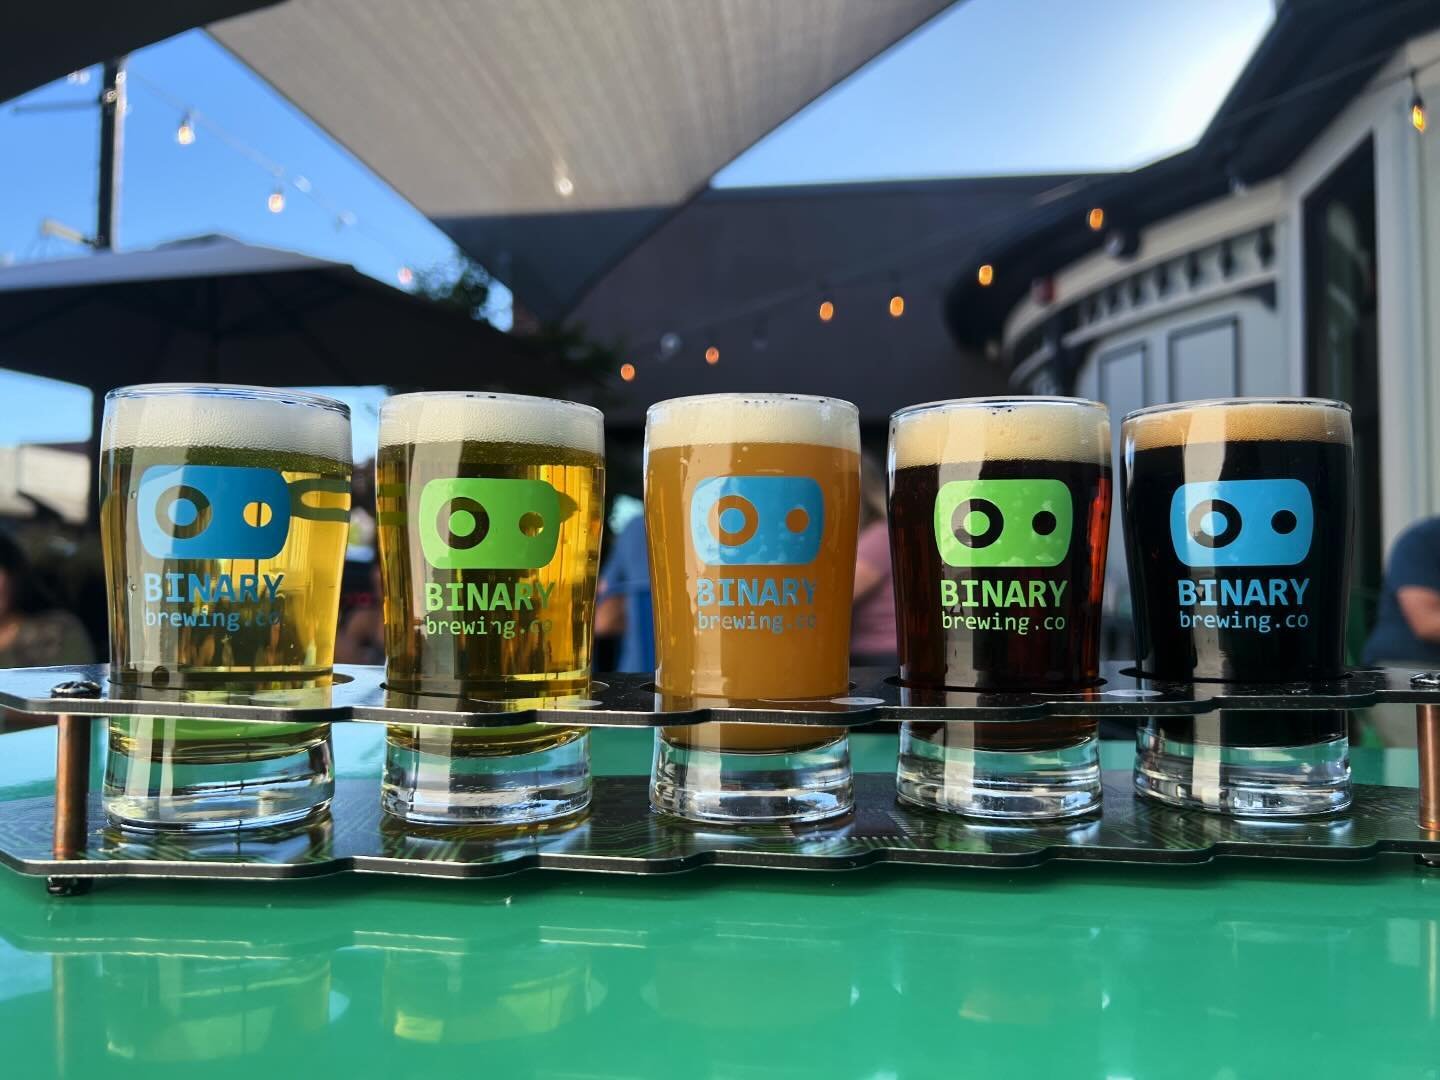 Come one, come all! We&rsquo;ve got what you&rsquo;re looking for this weekend and flights are just $10 all day Sunday! Bring mom, the fam, or the pup and relax in the sunshine 😎 🍻